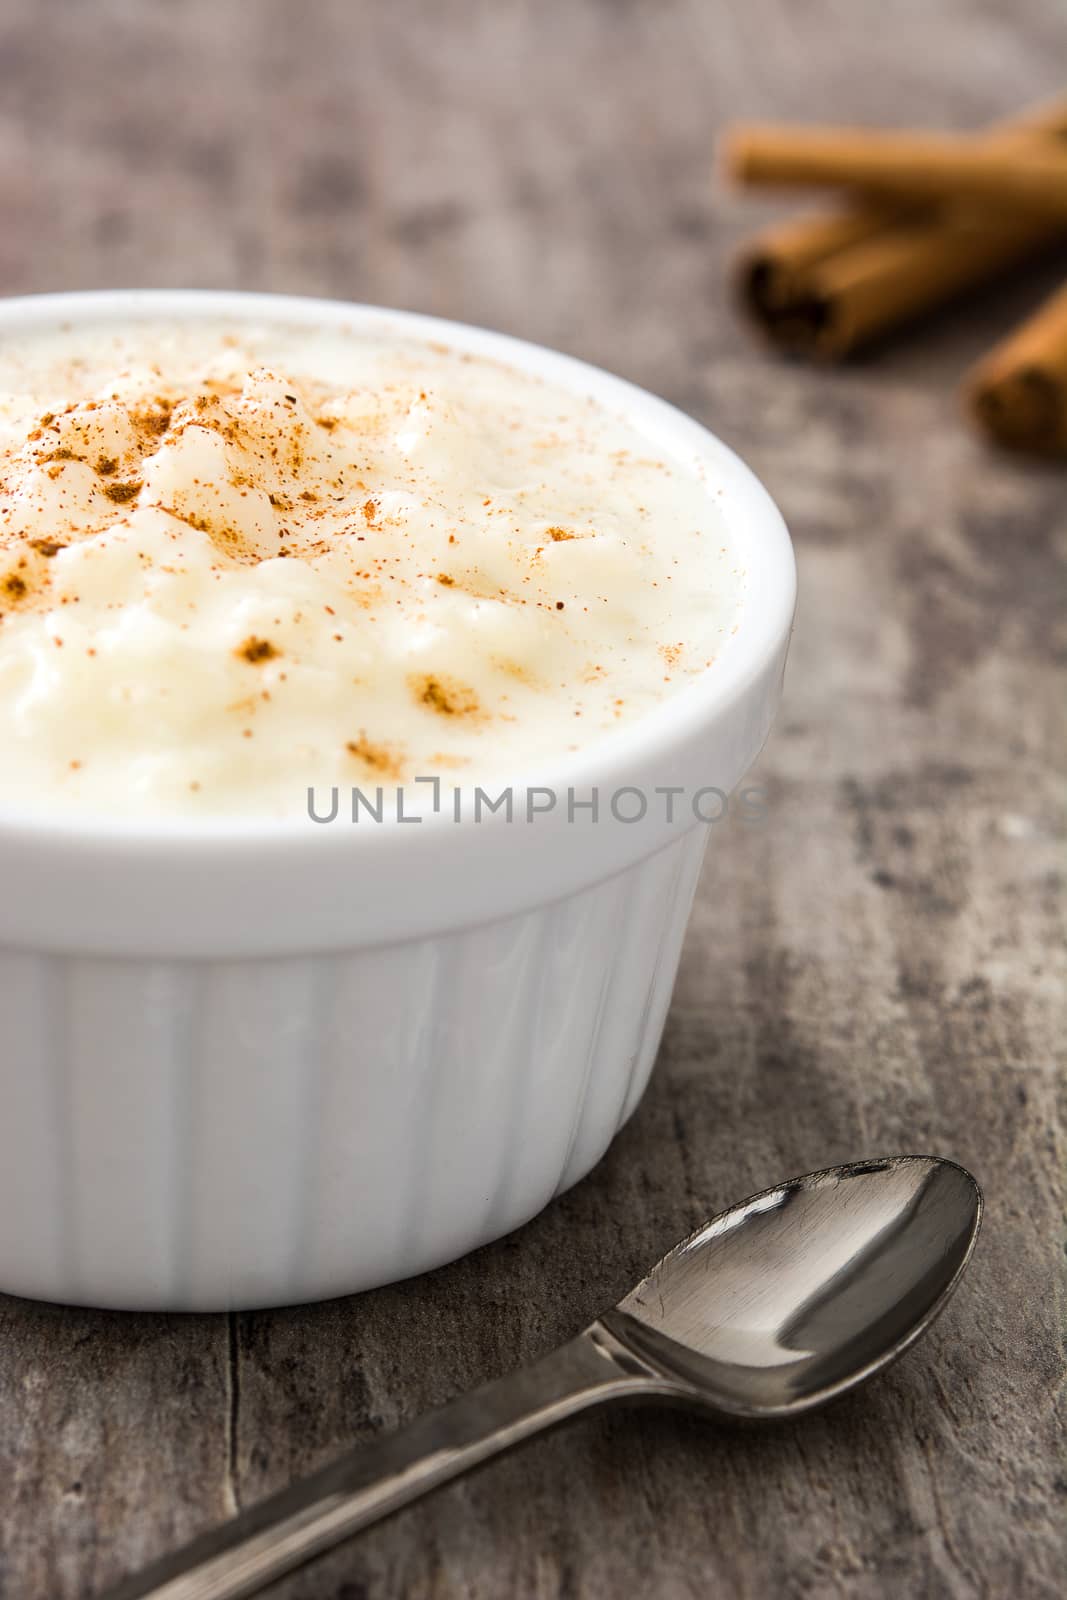 Arroz con leche. Rice pudding with cinnamon on wooden background by chandlervid85